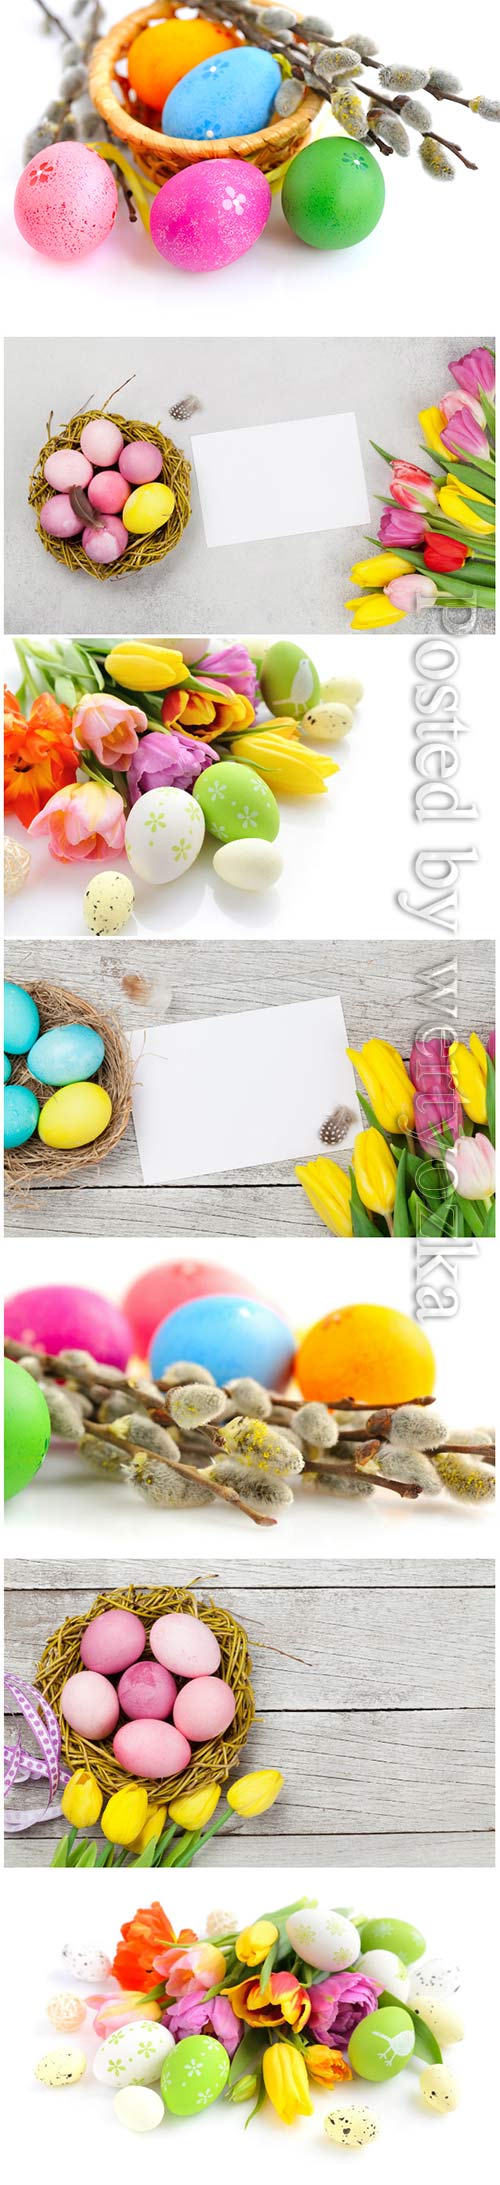 Happy Easter stock photo, Easter eggs, spring flowers # 8